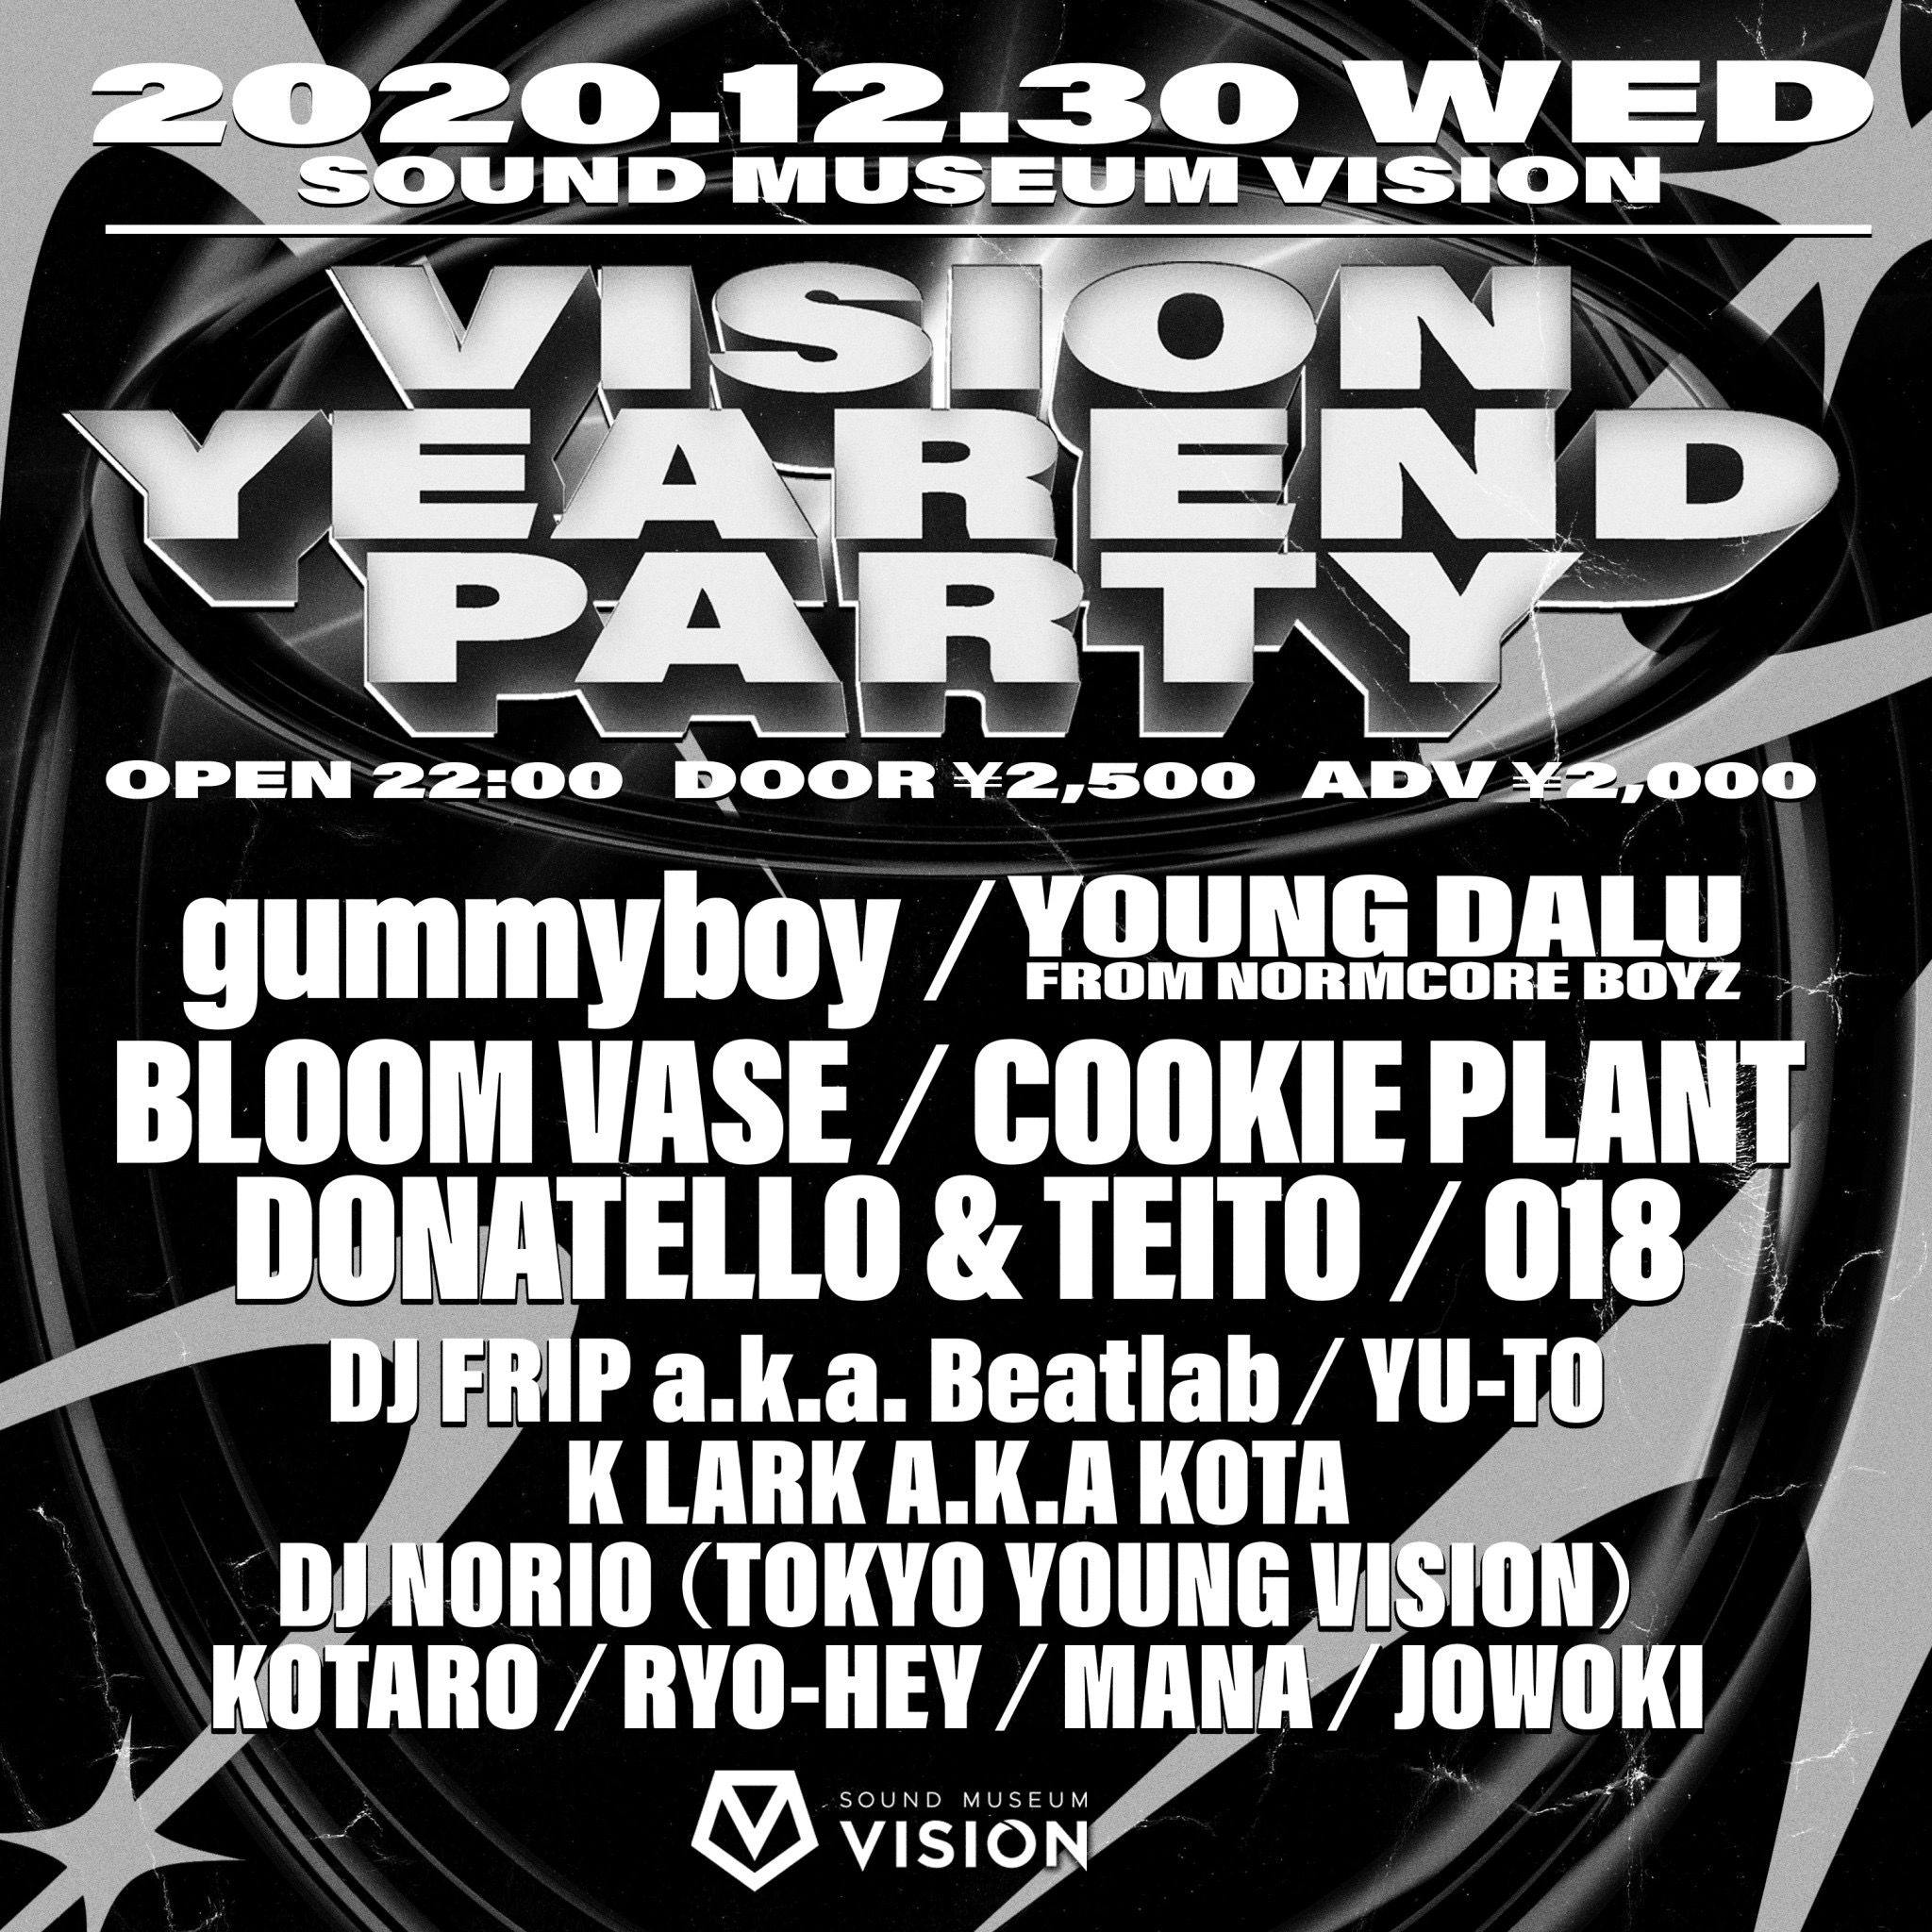 VISION YEAREND PARTY